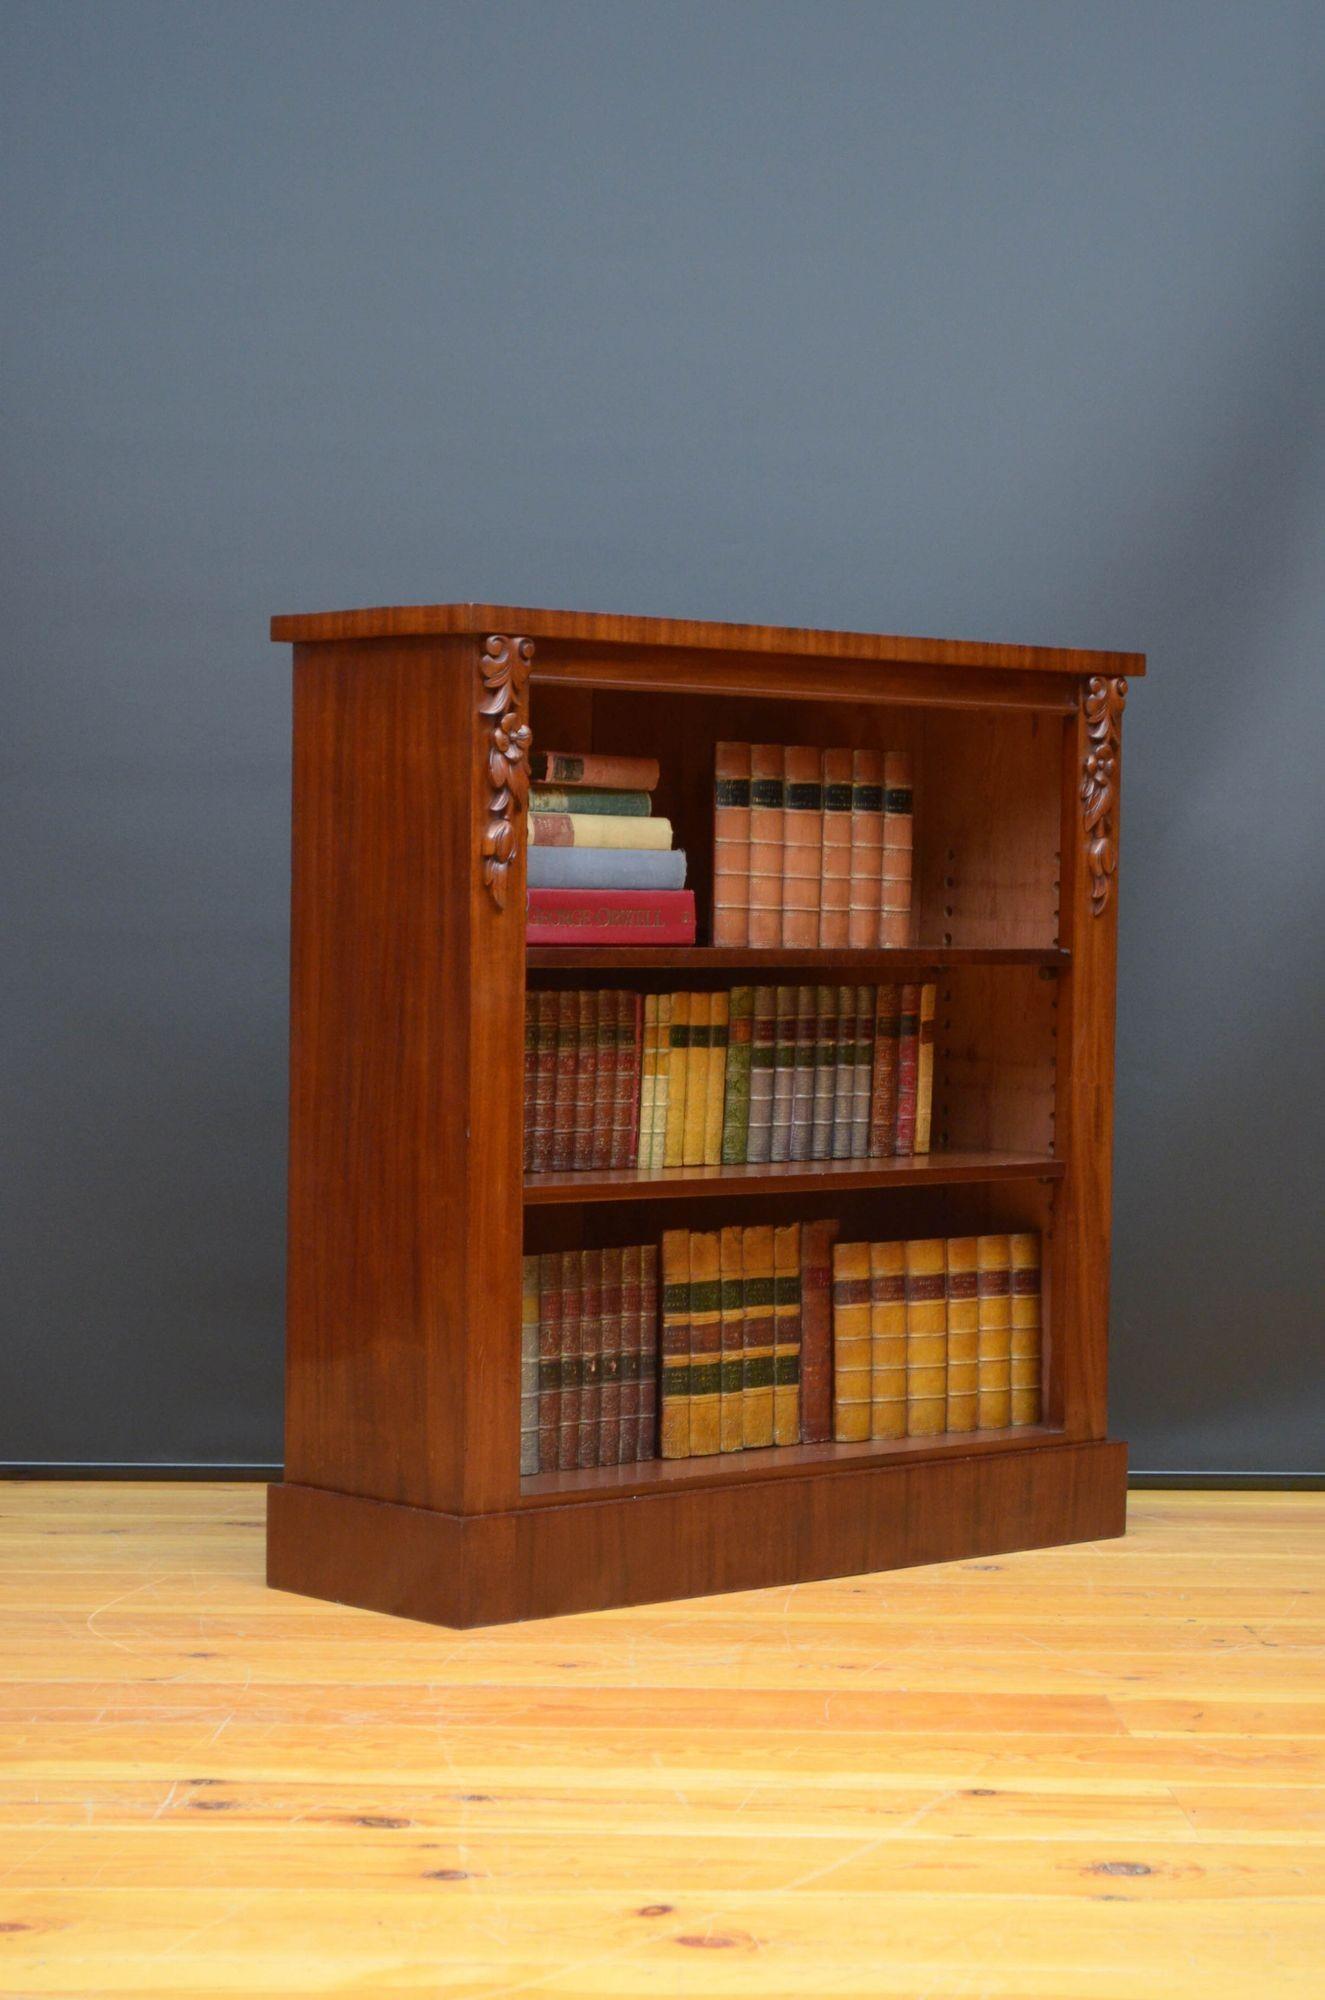 Sn5402 Victorian mahogany open bookcase of narrow proportions with figured mahogany top and two height adjustable shelves, all flanked by floral drop carvings, standing on plinth base. This antique bookcase has bee sympathetically restored and is